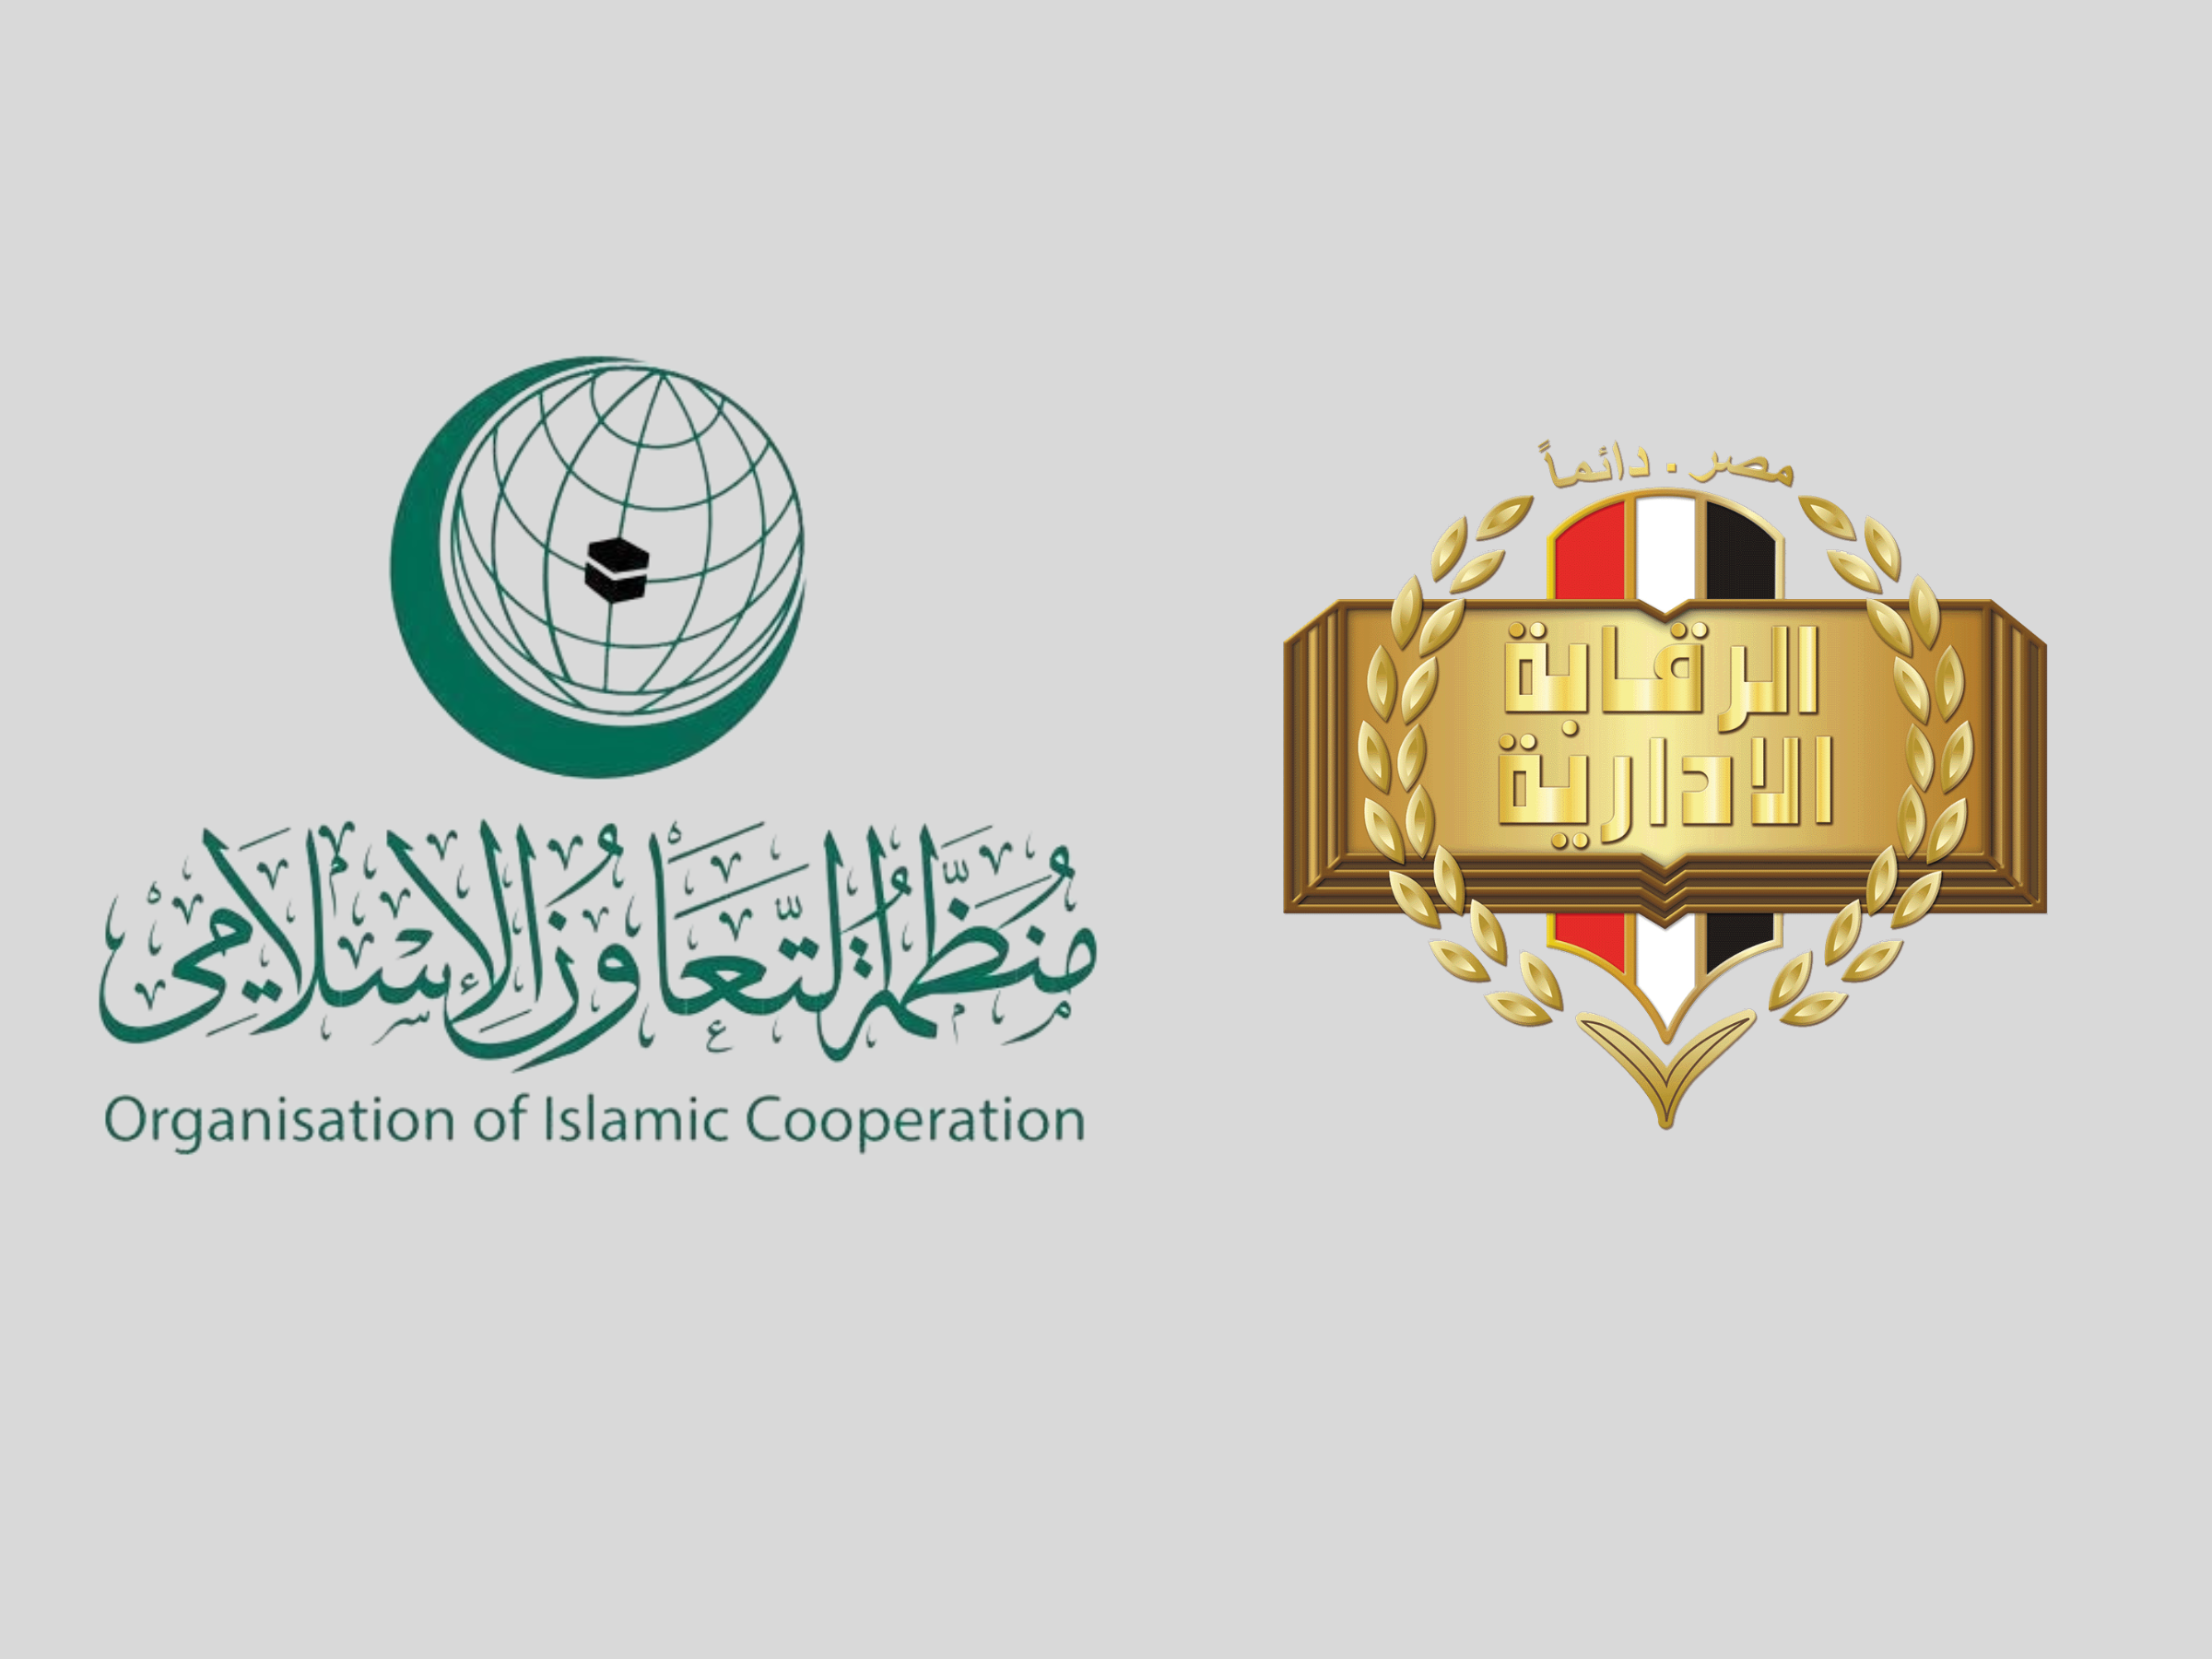 In the presence of the Chairman of the Administrative Control Authority, Anti-Corruption Law Enforcement Authorities from the Member States of the Organization of Islamic Cooperation adopt the Makkah Al-Mukarramah Convention on Anti-Corruption Law Enforcement 